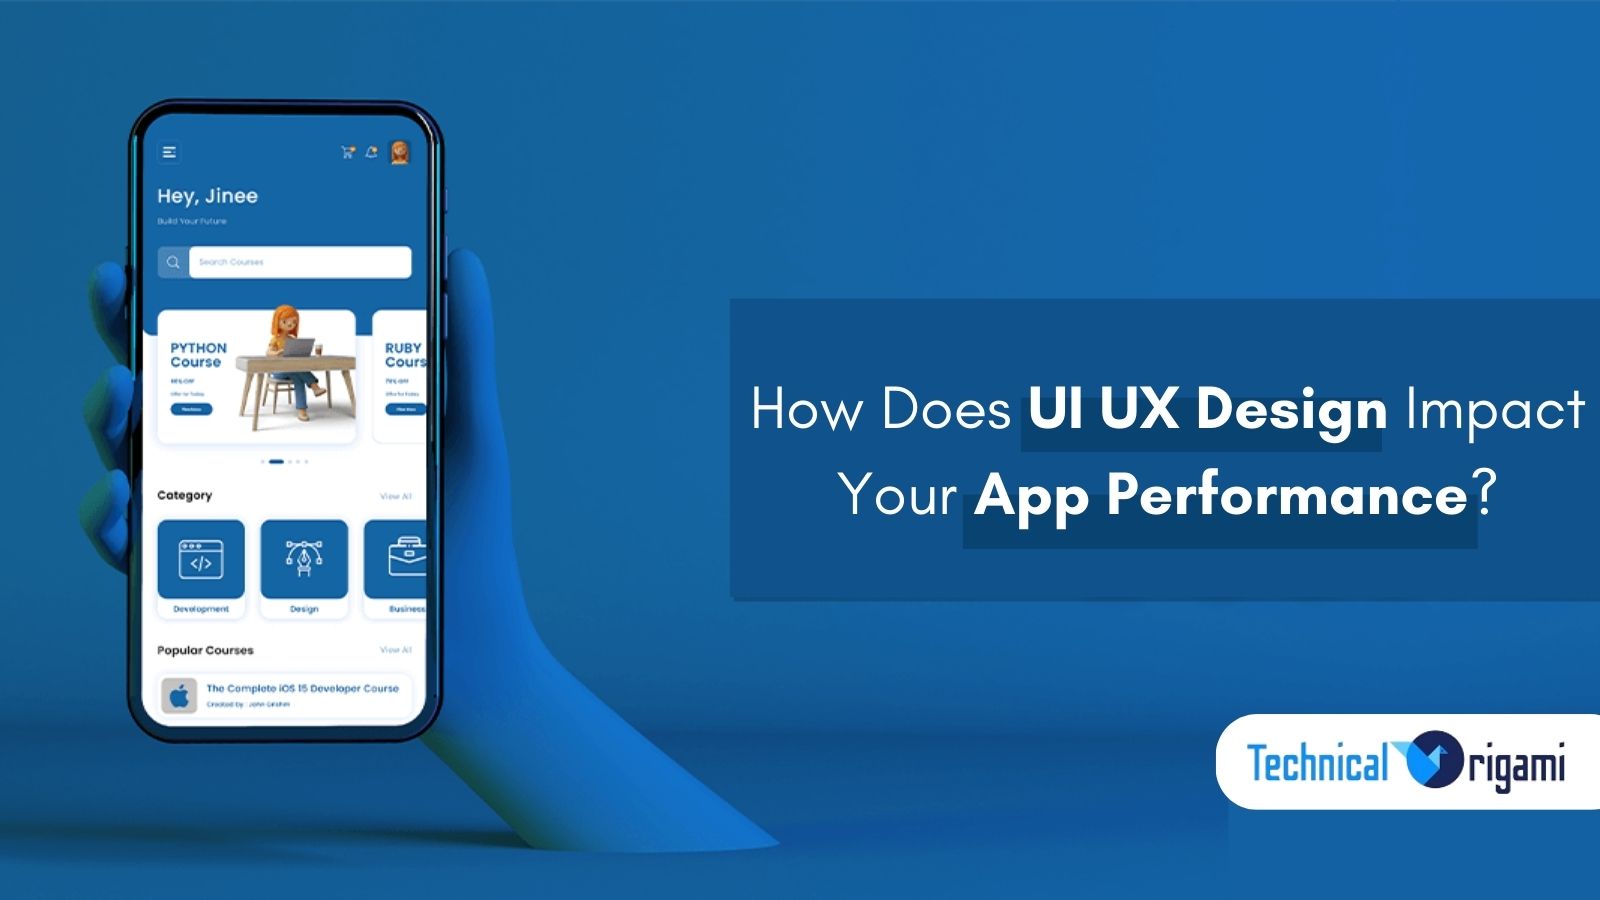 How Does UI UX Design Impact Your App Performance?